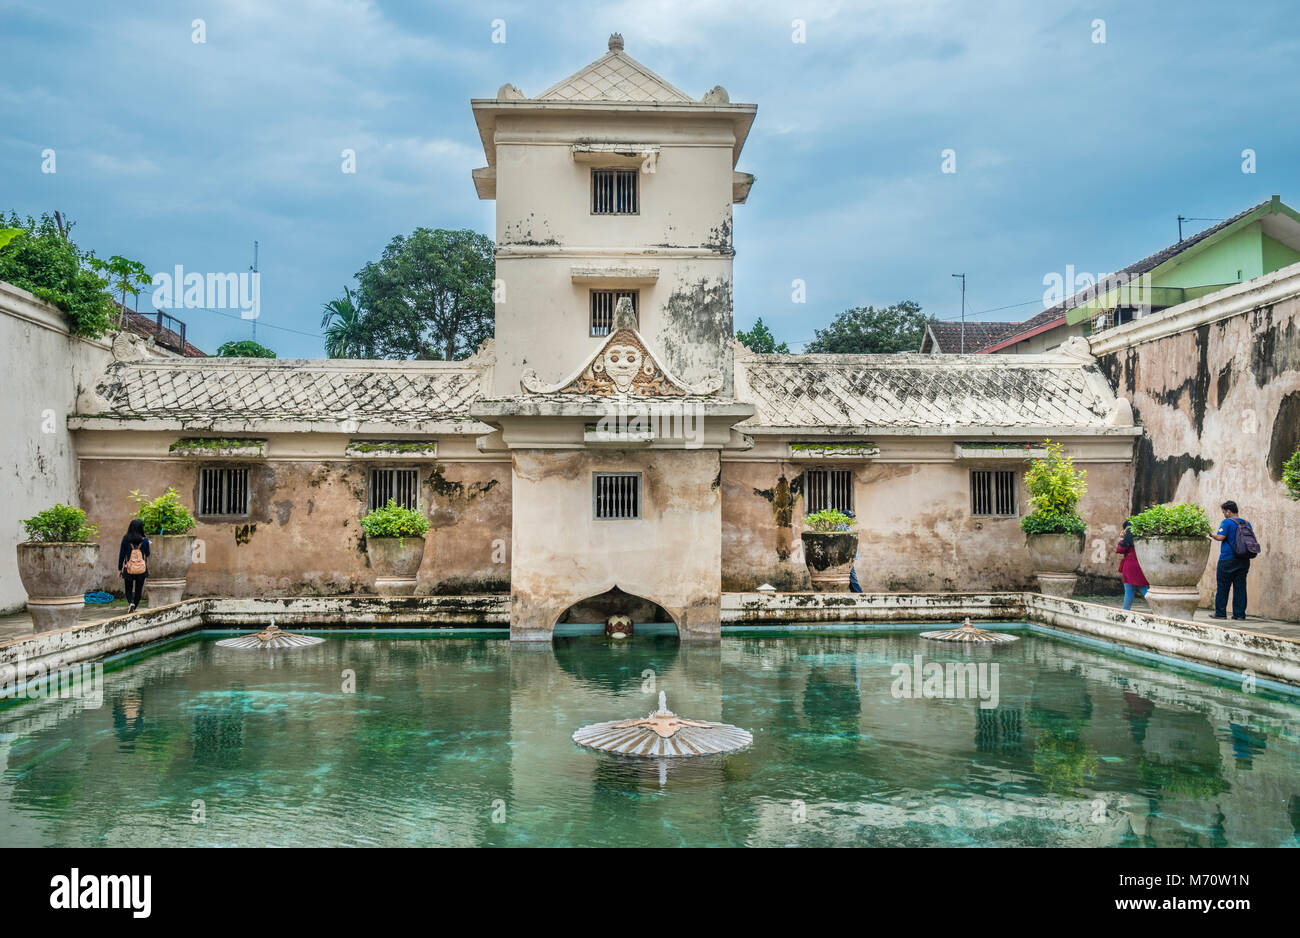 Umbul Pasiraman bathing complex with tower from where the sultan observed the bathing women at the Taman Sari Water Castle, the site of a former royal Stock Photo